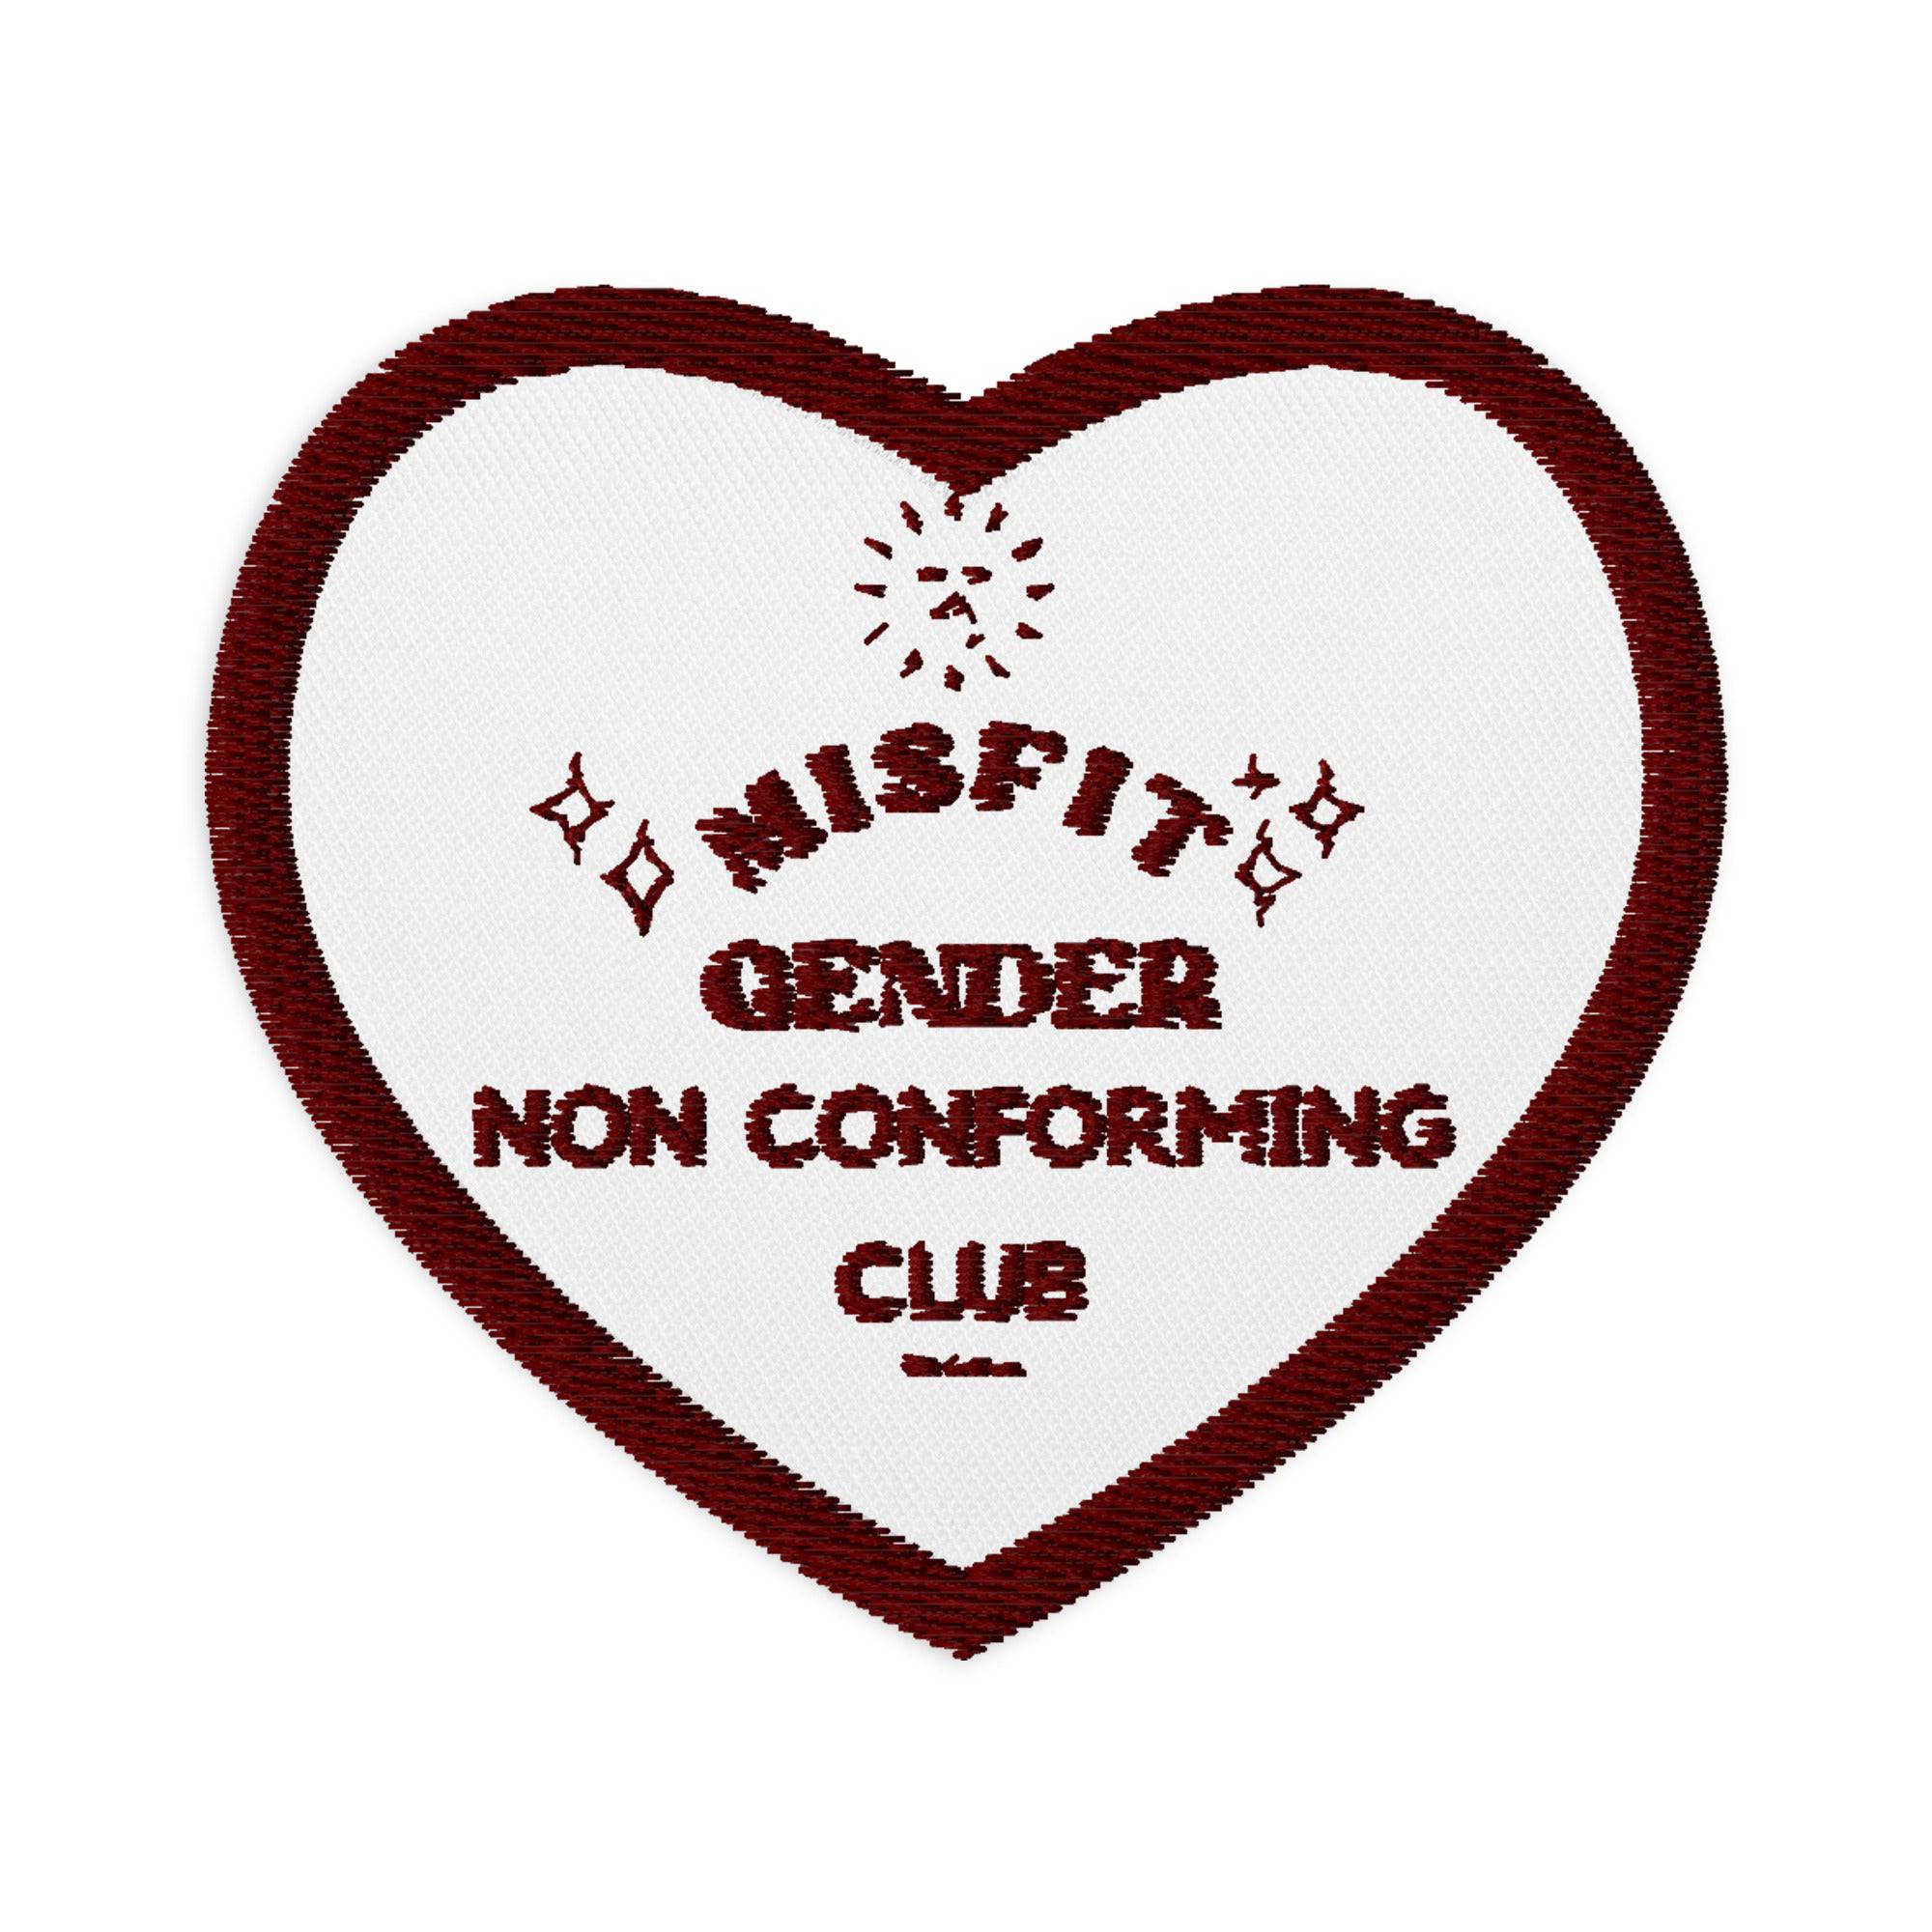 Misfit Gender Non Conforming Club Embroidered patch - Rose Gold Co. Shop